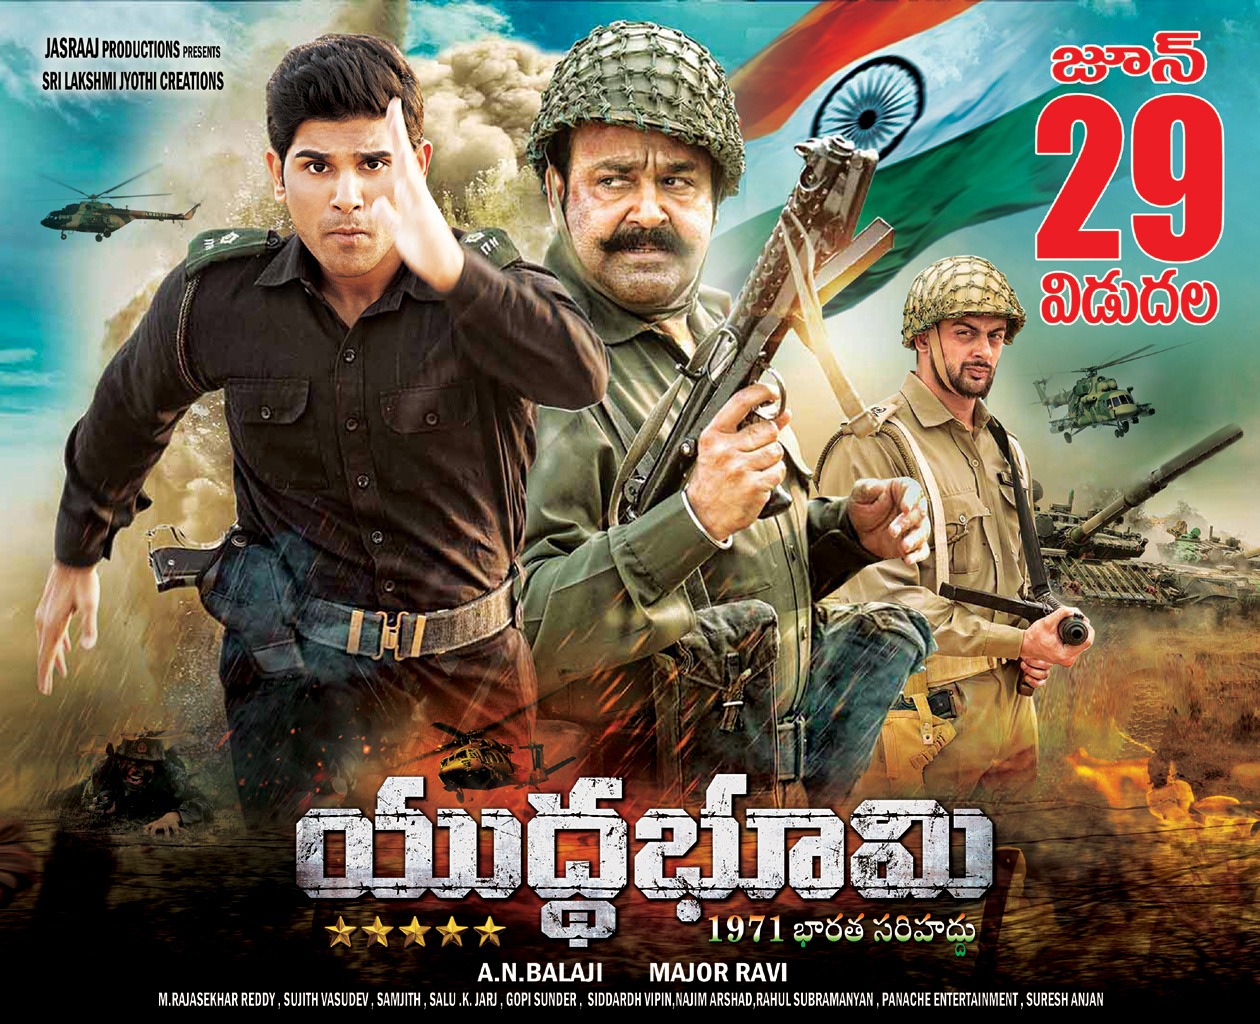 Yuddha Bhoomi is releasing in more than 400 theaters on 29th June